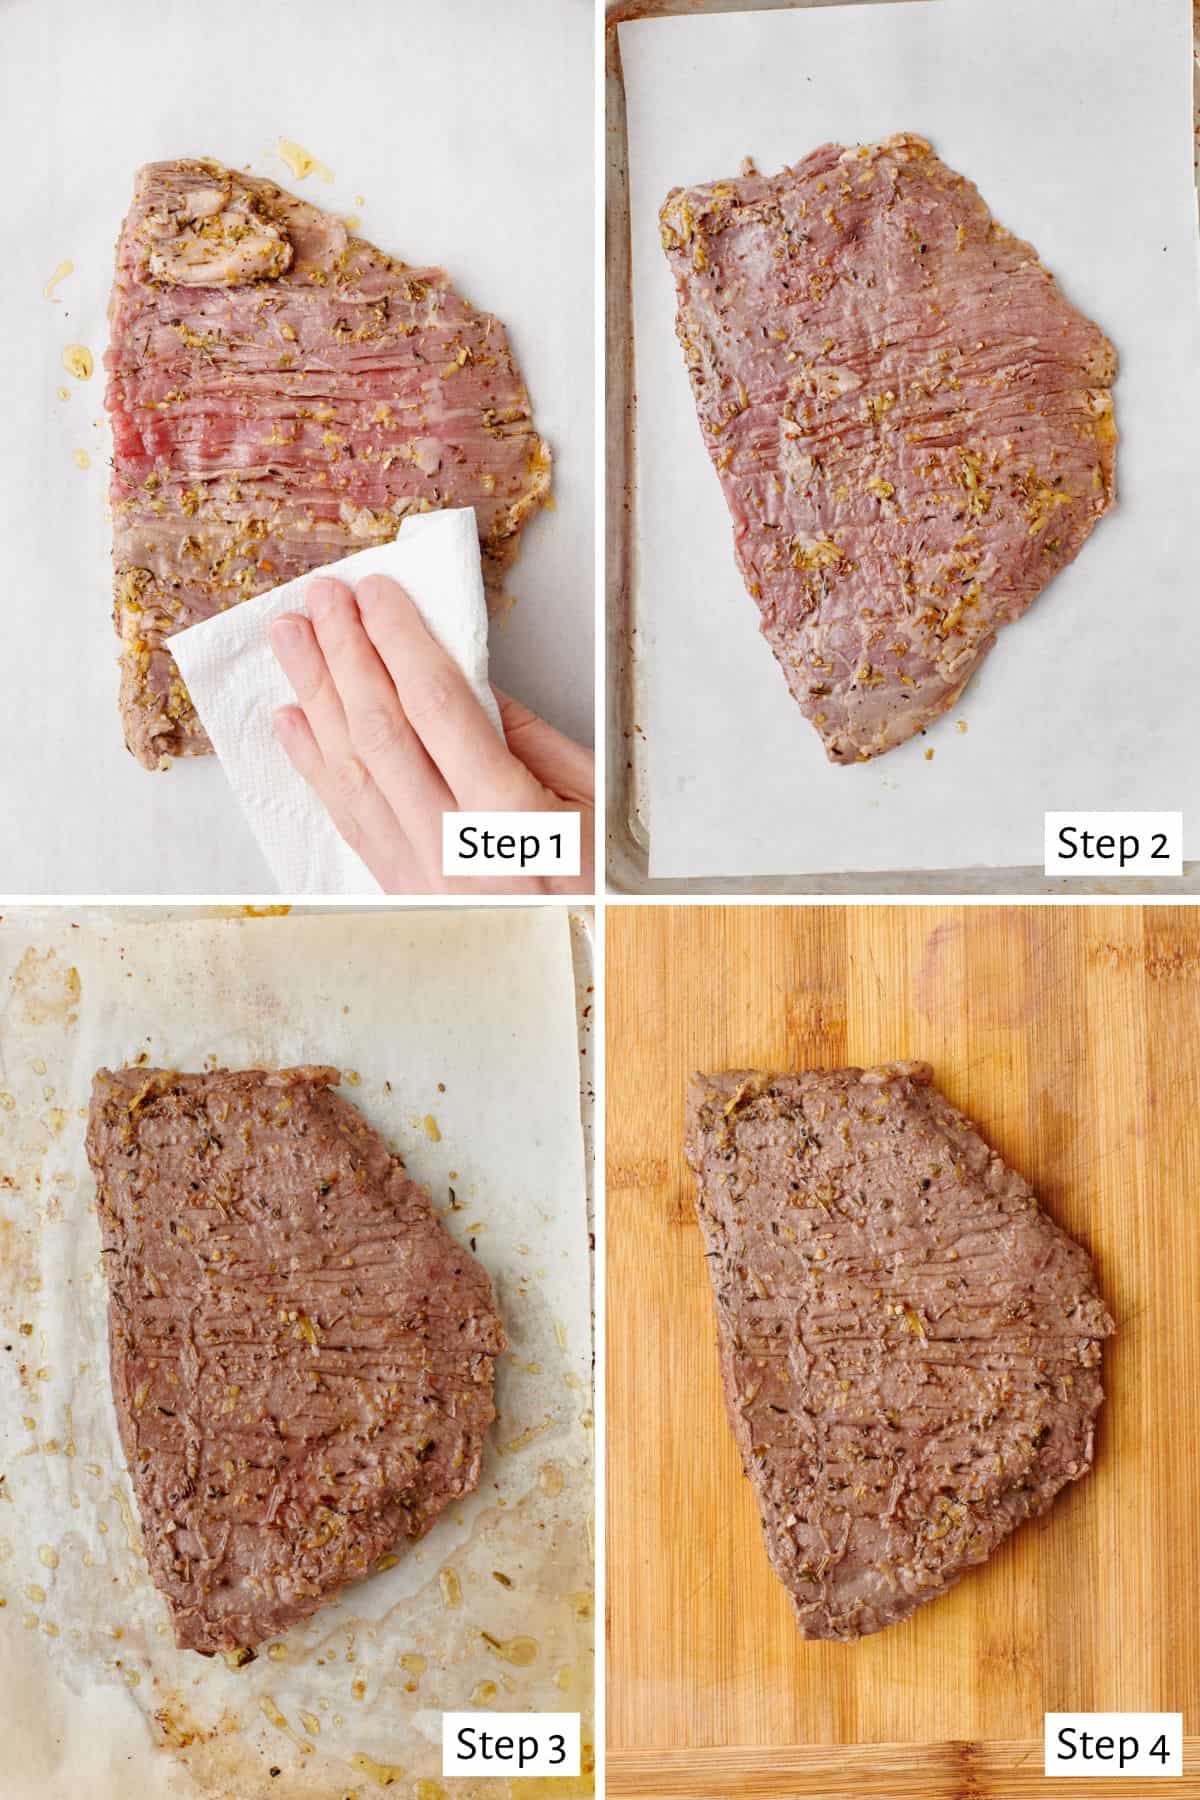 4 image collage making recipe: 1- marinated steak on a cutting board being patted lightly with paper towels, 2- steak on a parchment lined baking sheet, 3- steak after baking, 4- steak on cutting board to rest before slicing.